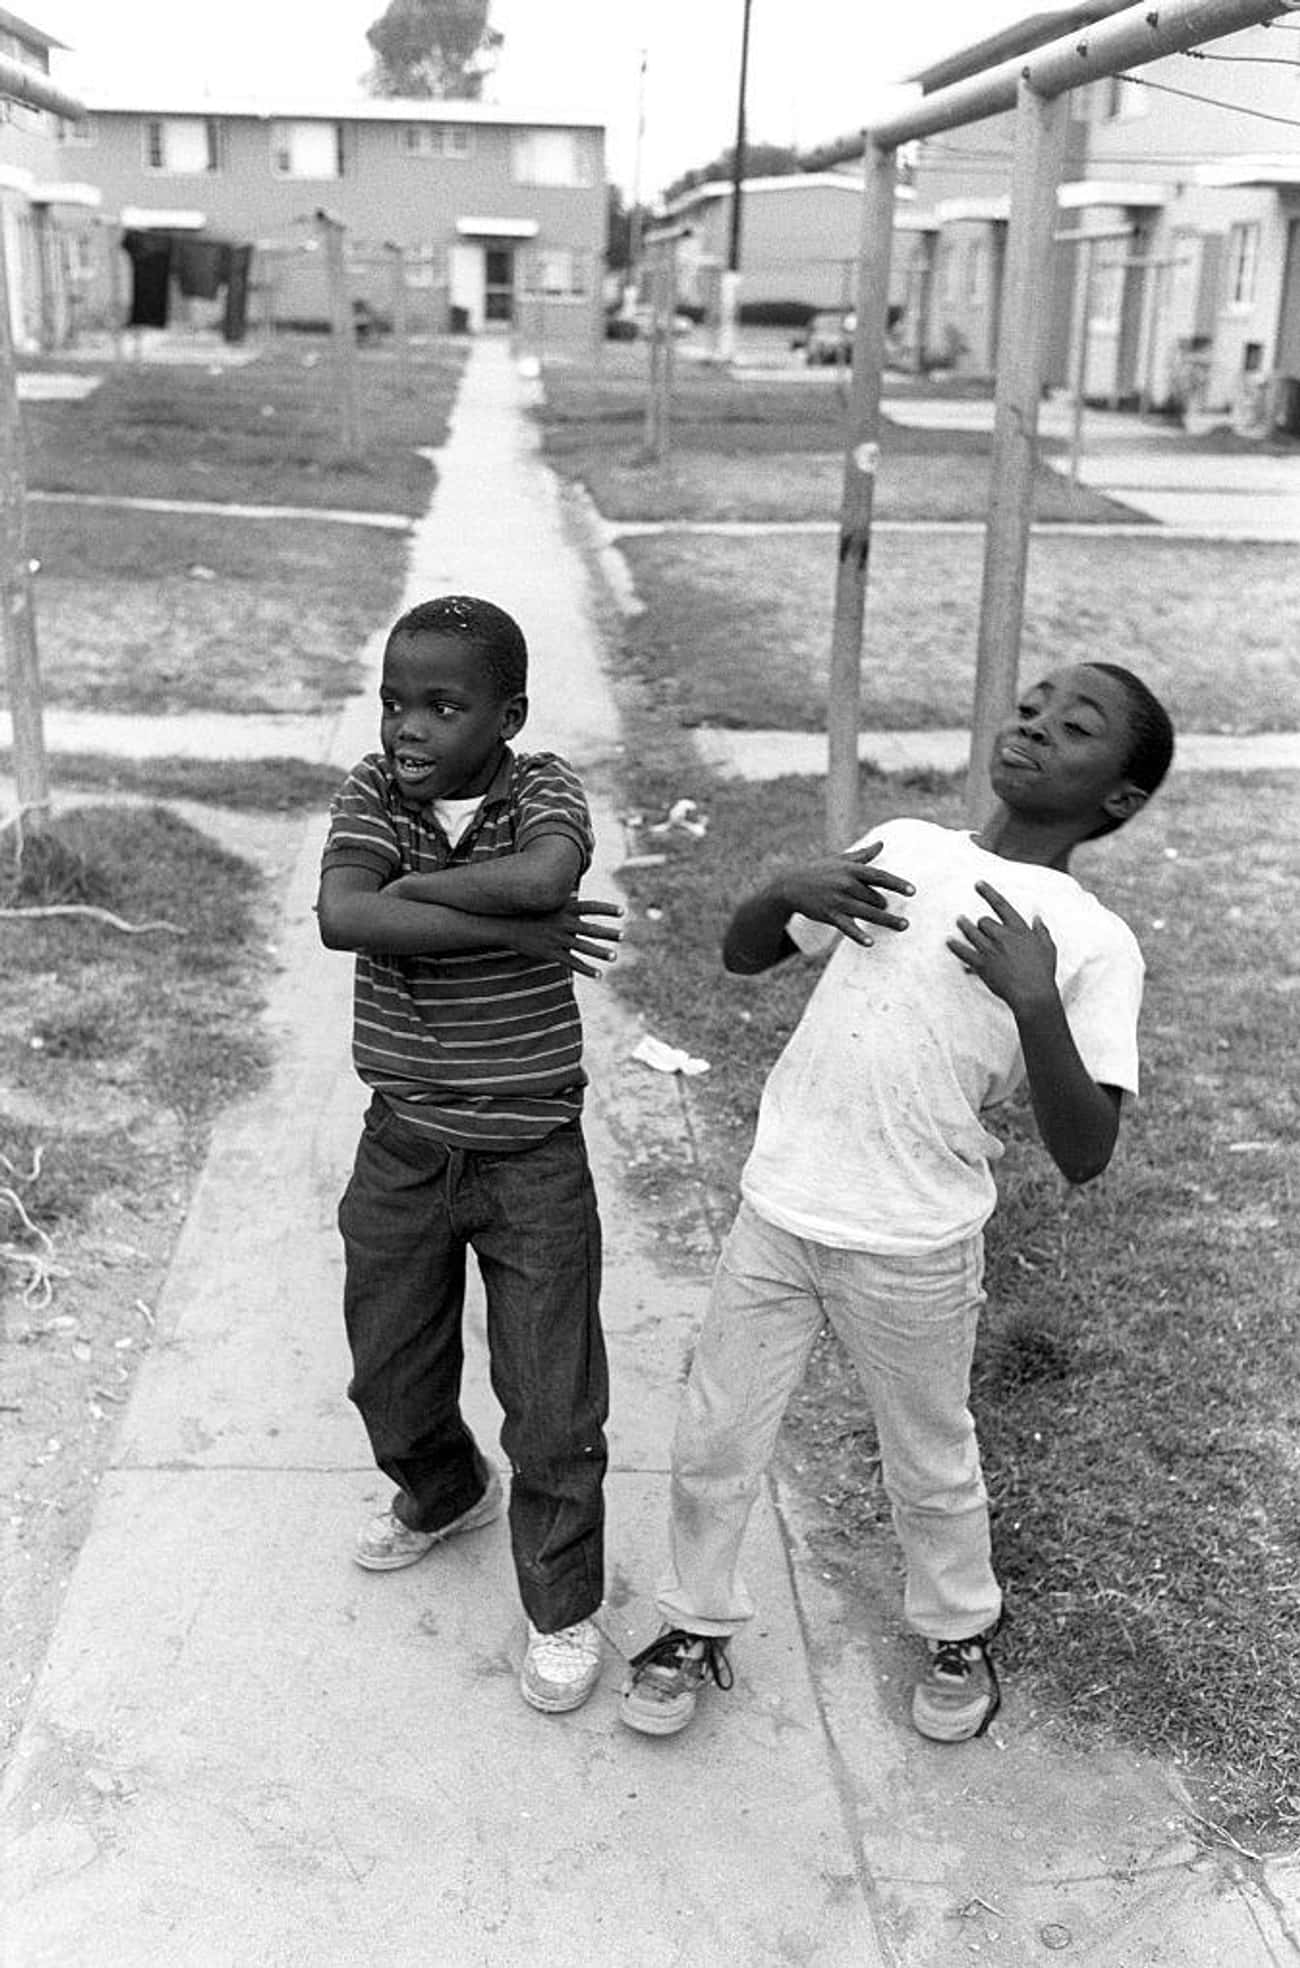 Kids Toss Gang Signs In Emulation Of Local Crips In The Jordan Downs Projects Of Watts